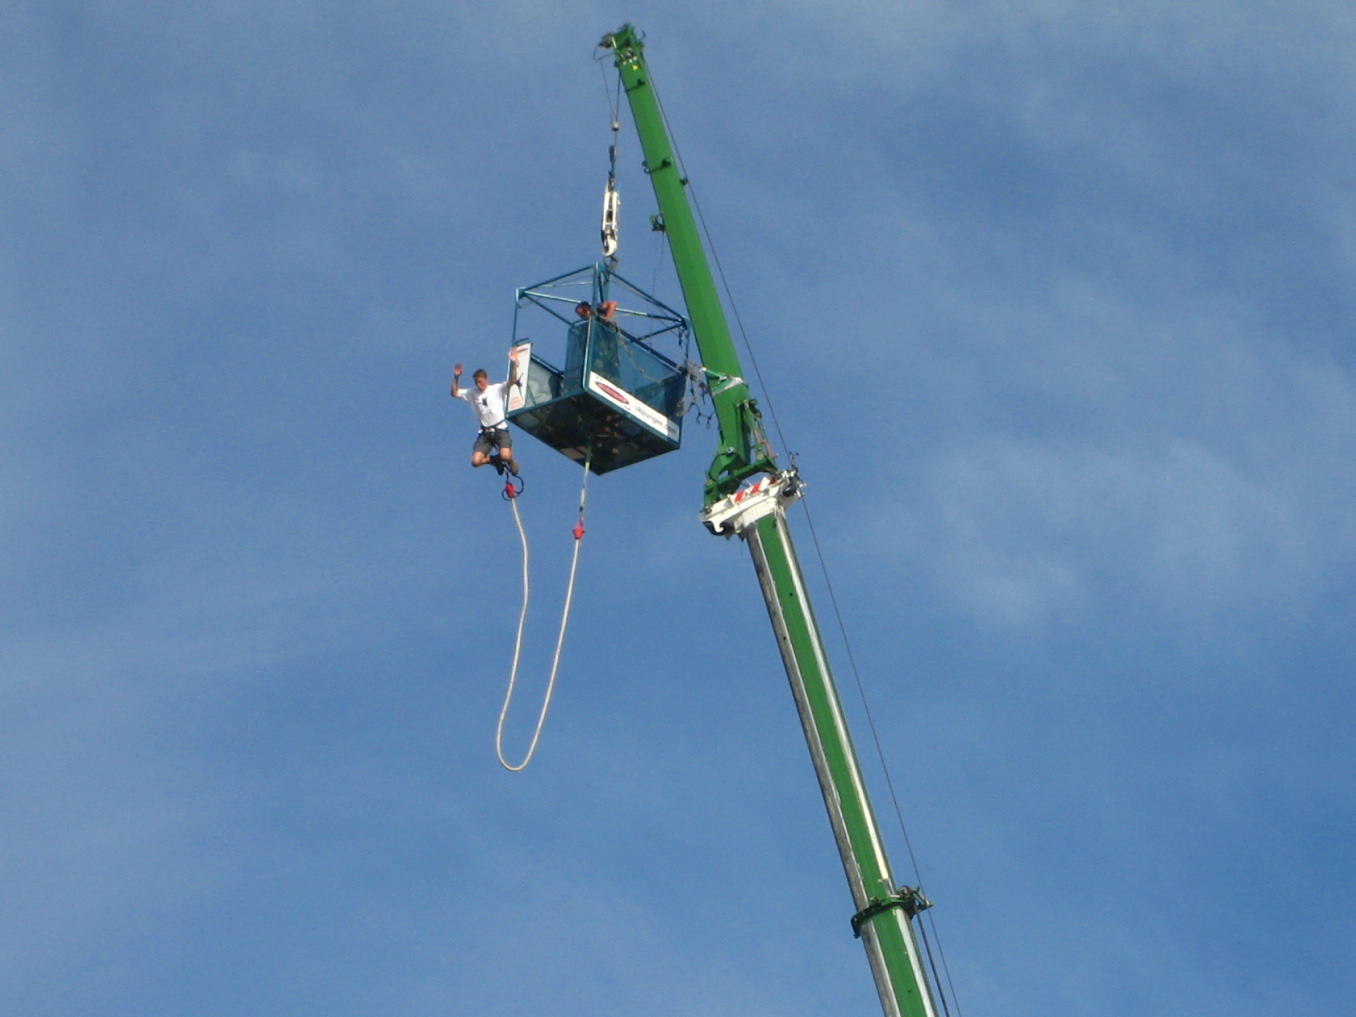 a green lift is being used to lift two people